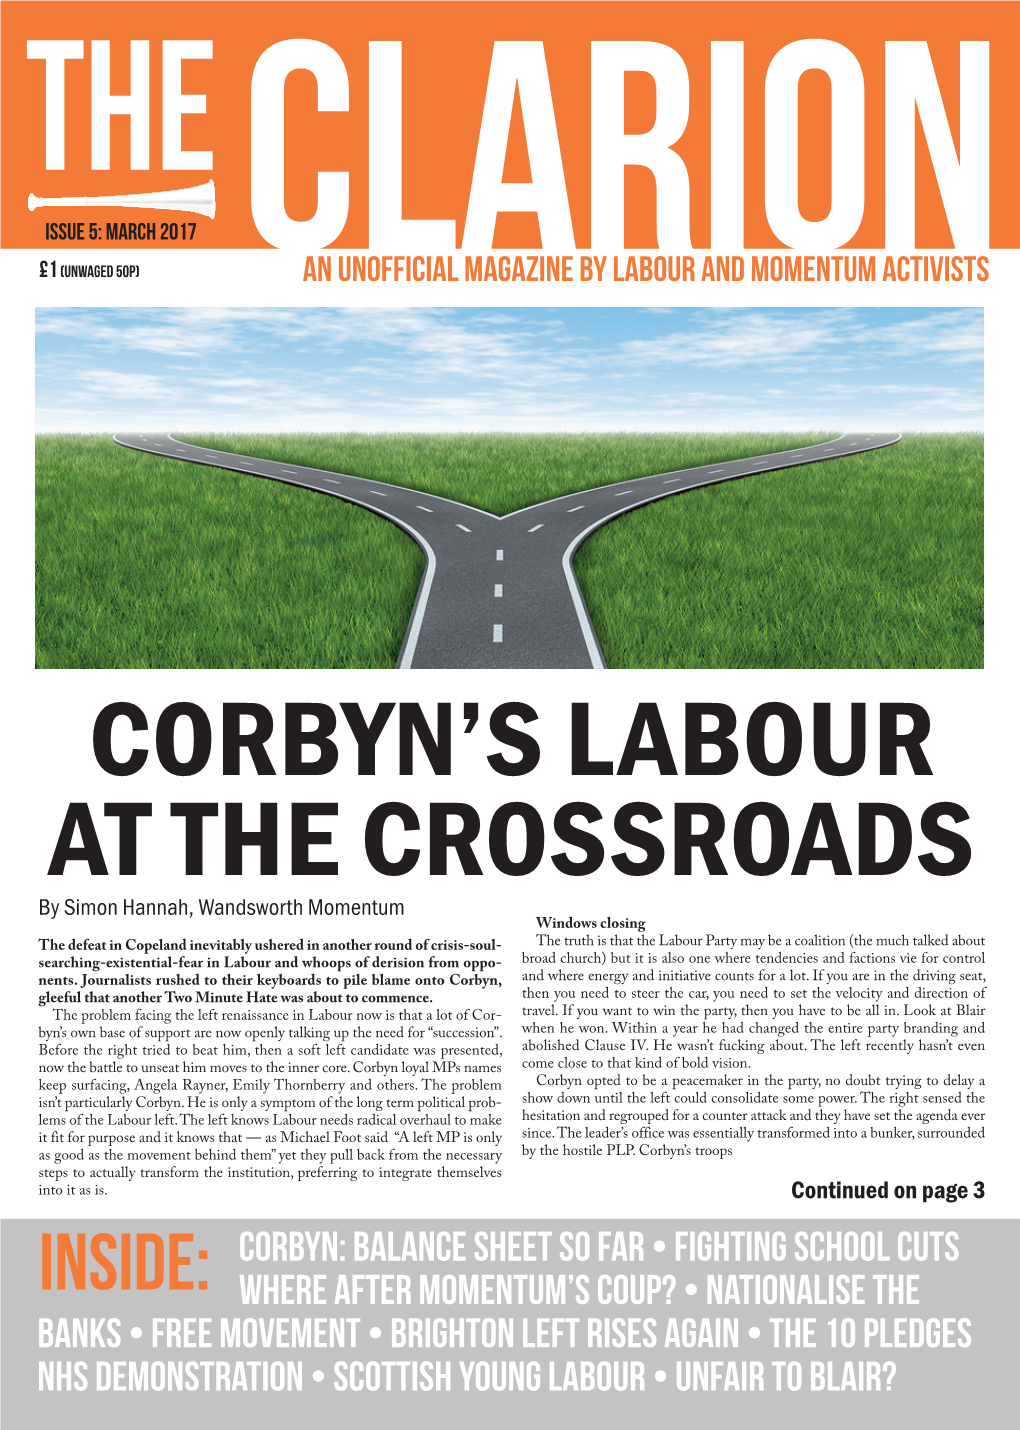 Corbyn's Labour at the Crossroads